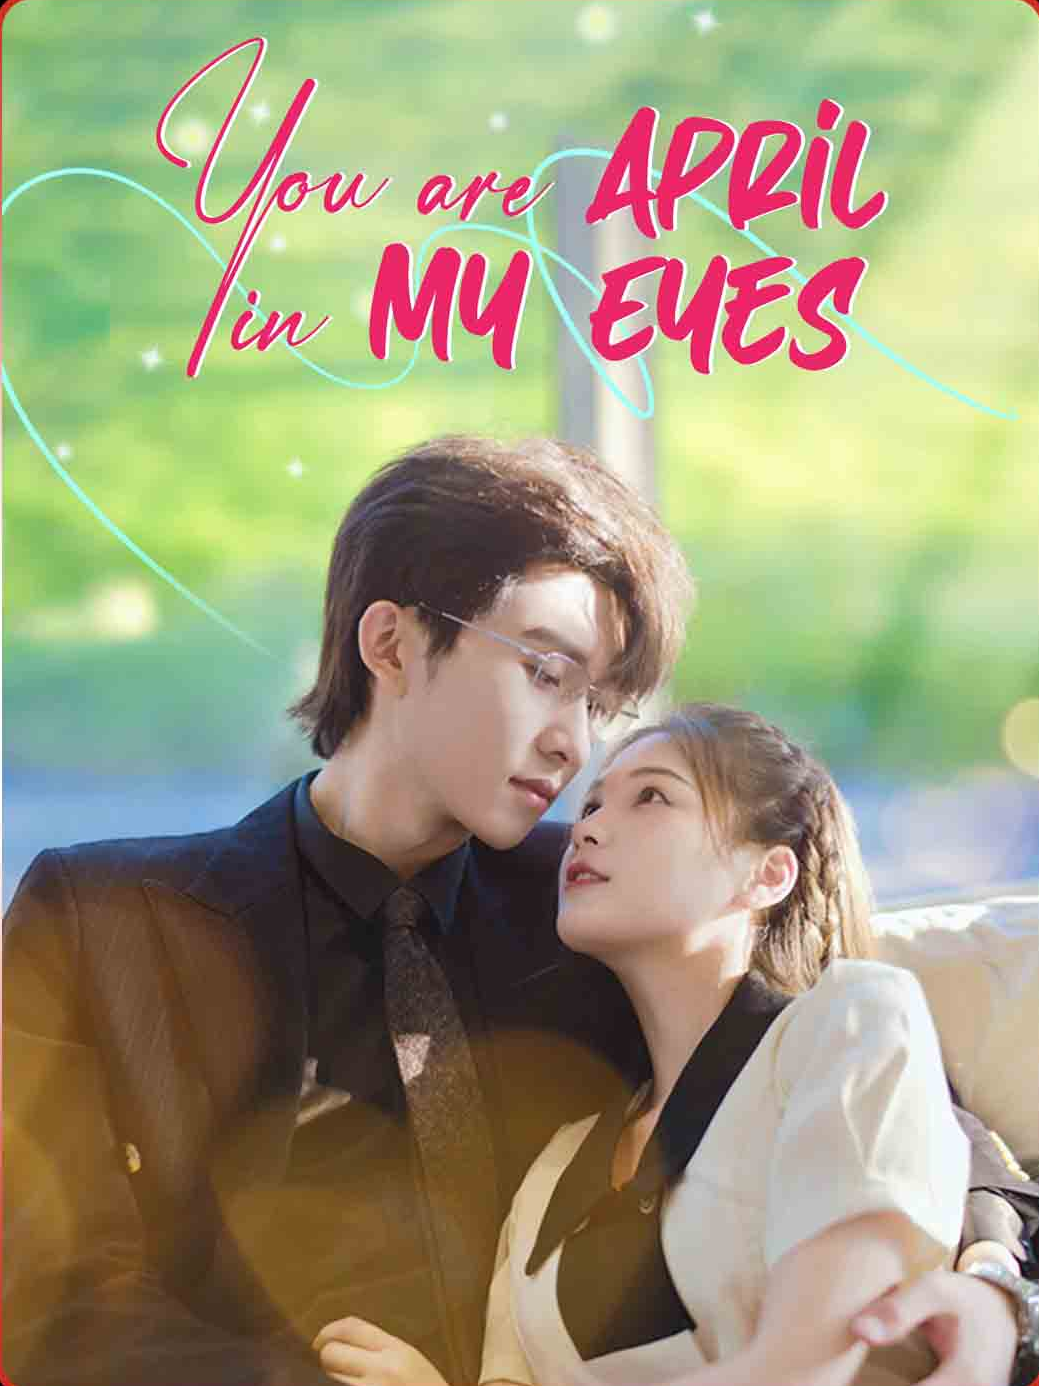 You are April in My Eyes PART6#movieclips #movie #drama #shortdrama